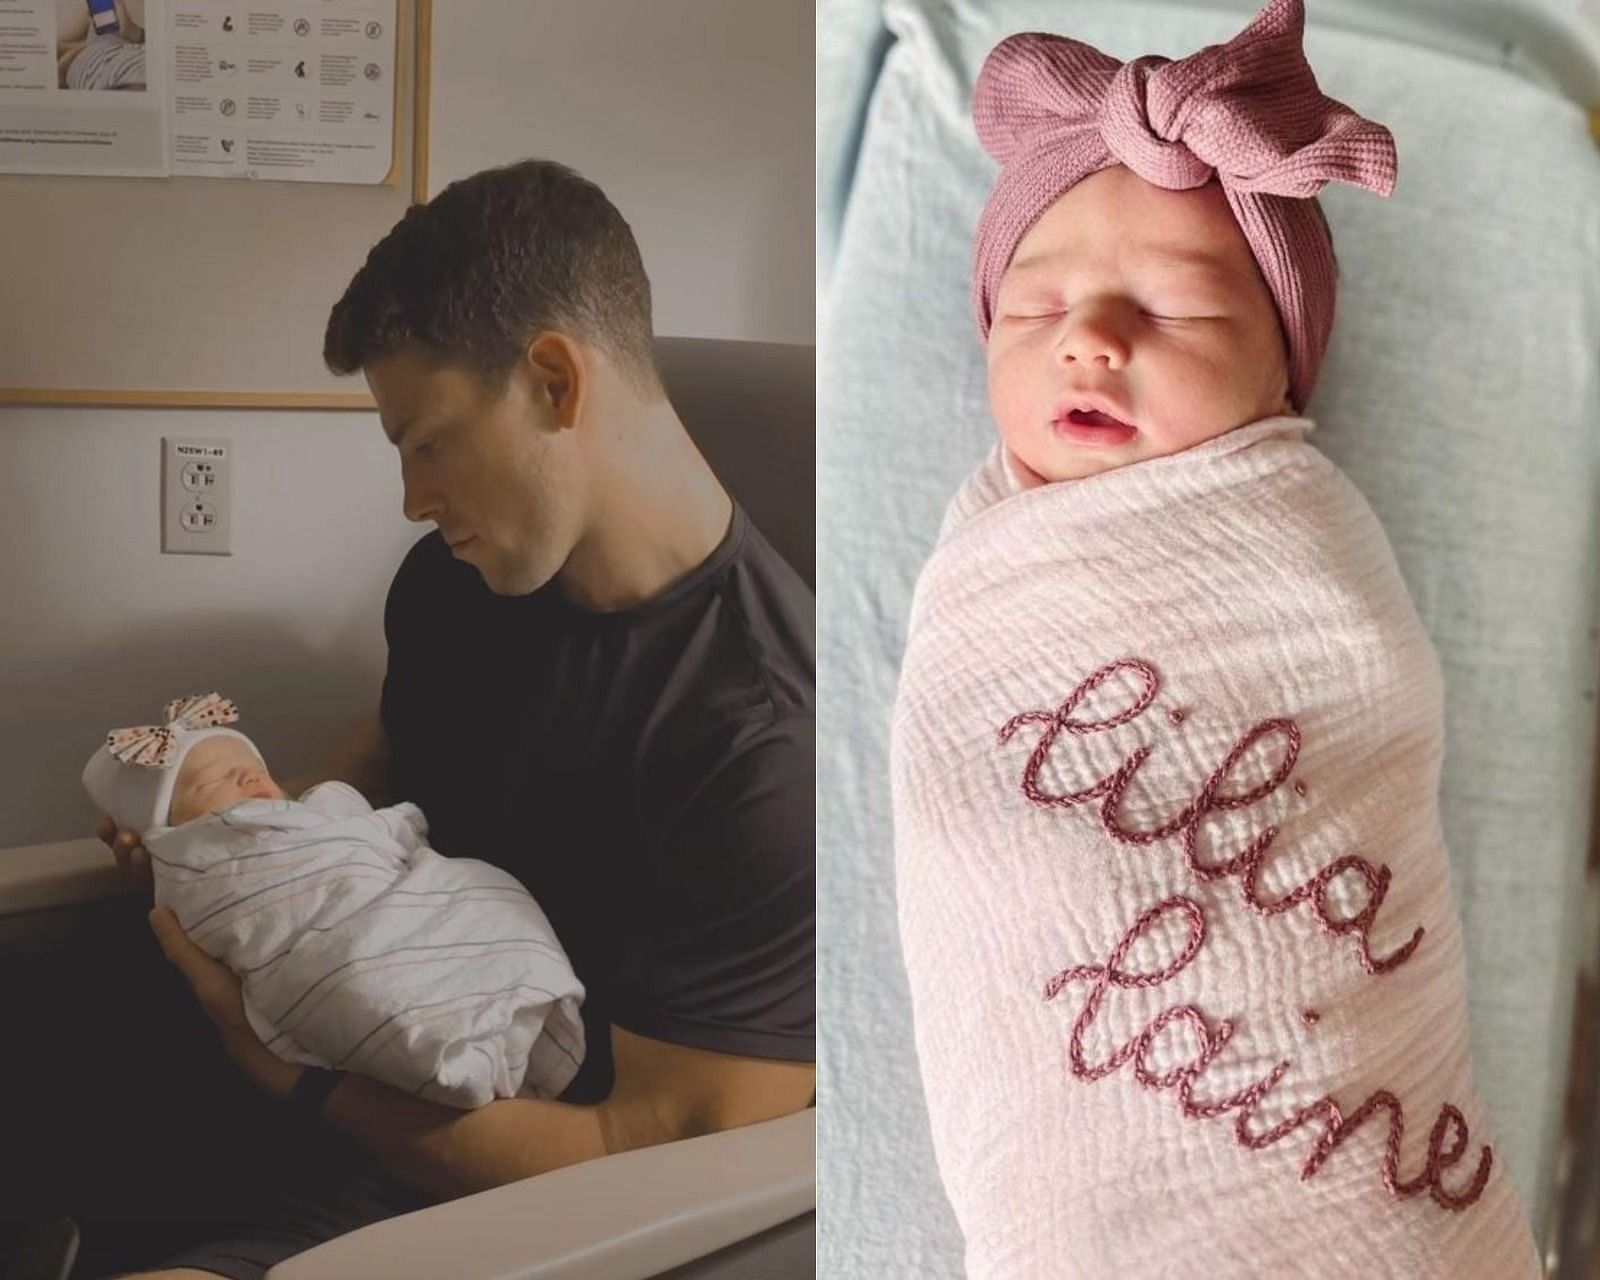 Charlie Coyle and his wife welcome their baby daughter Lilia